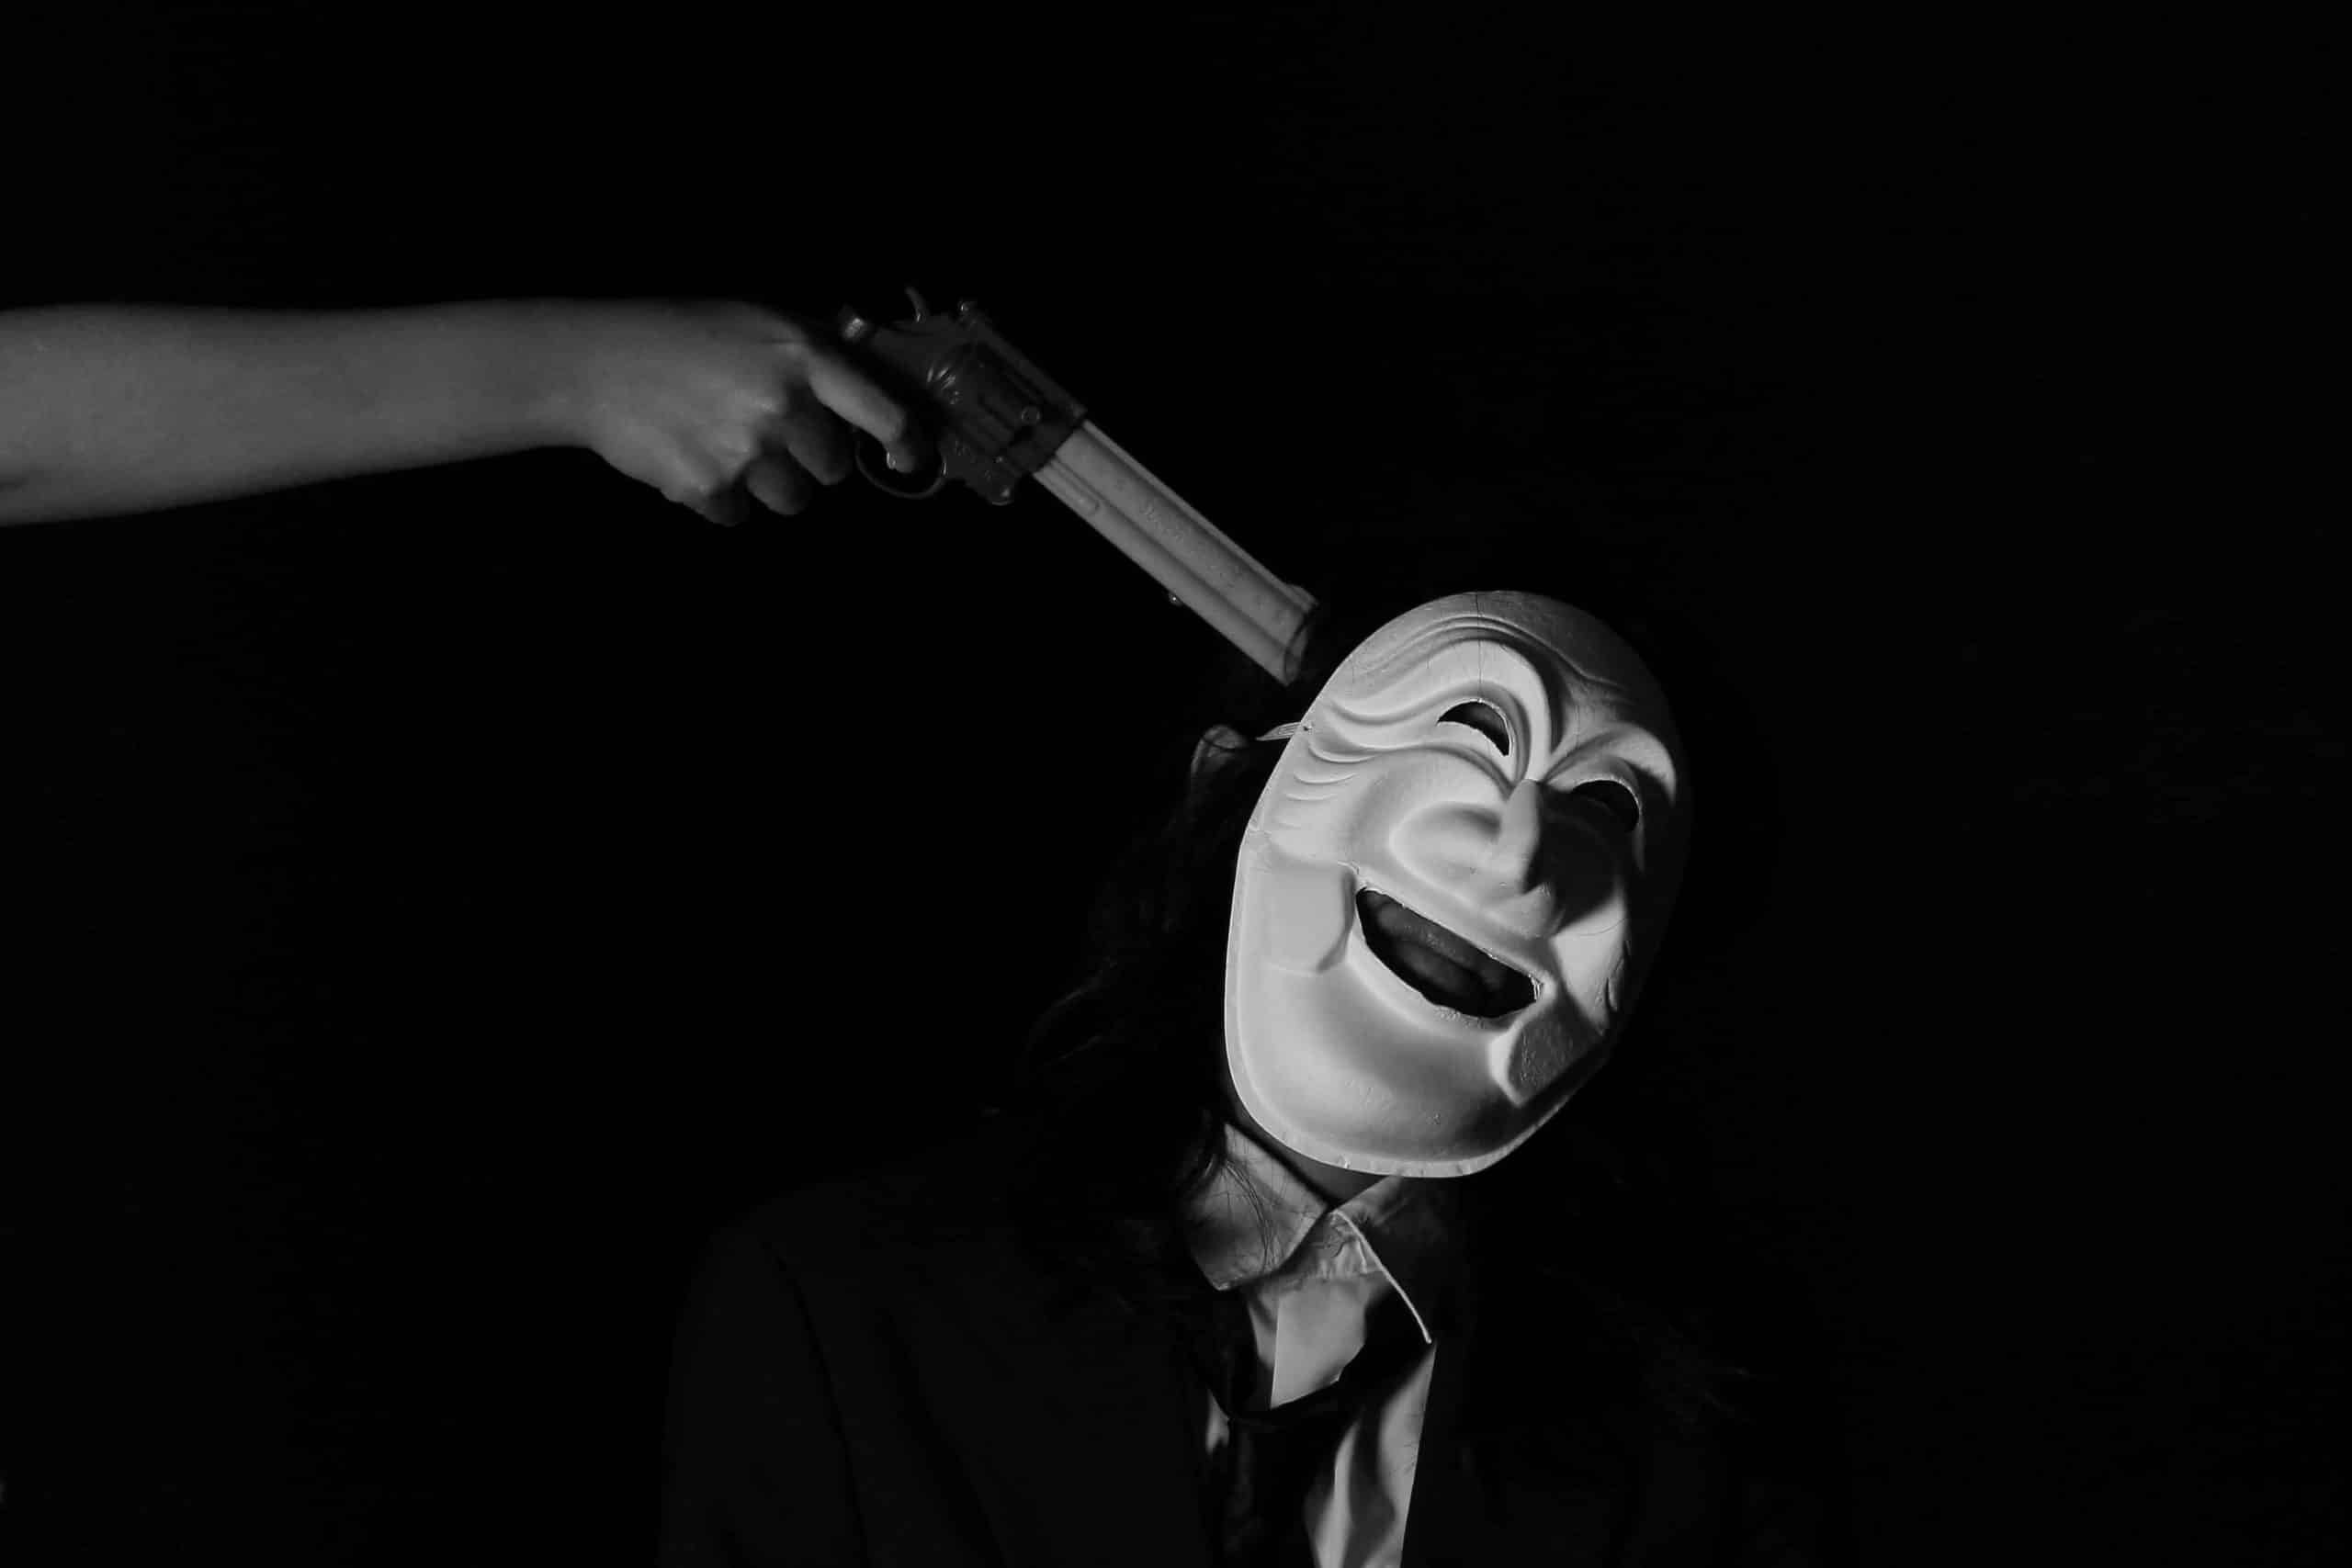 an image of a gun being pointed to a mask depiciting validity threats to an A/B test